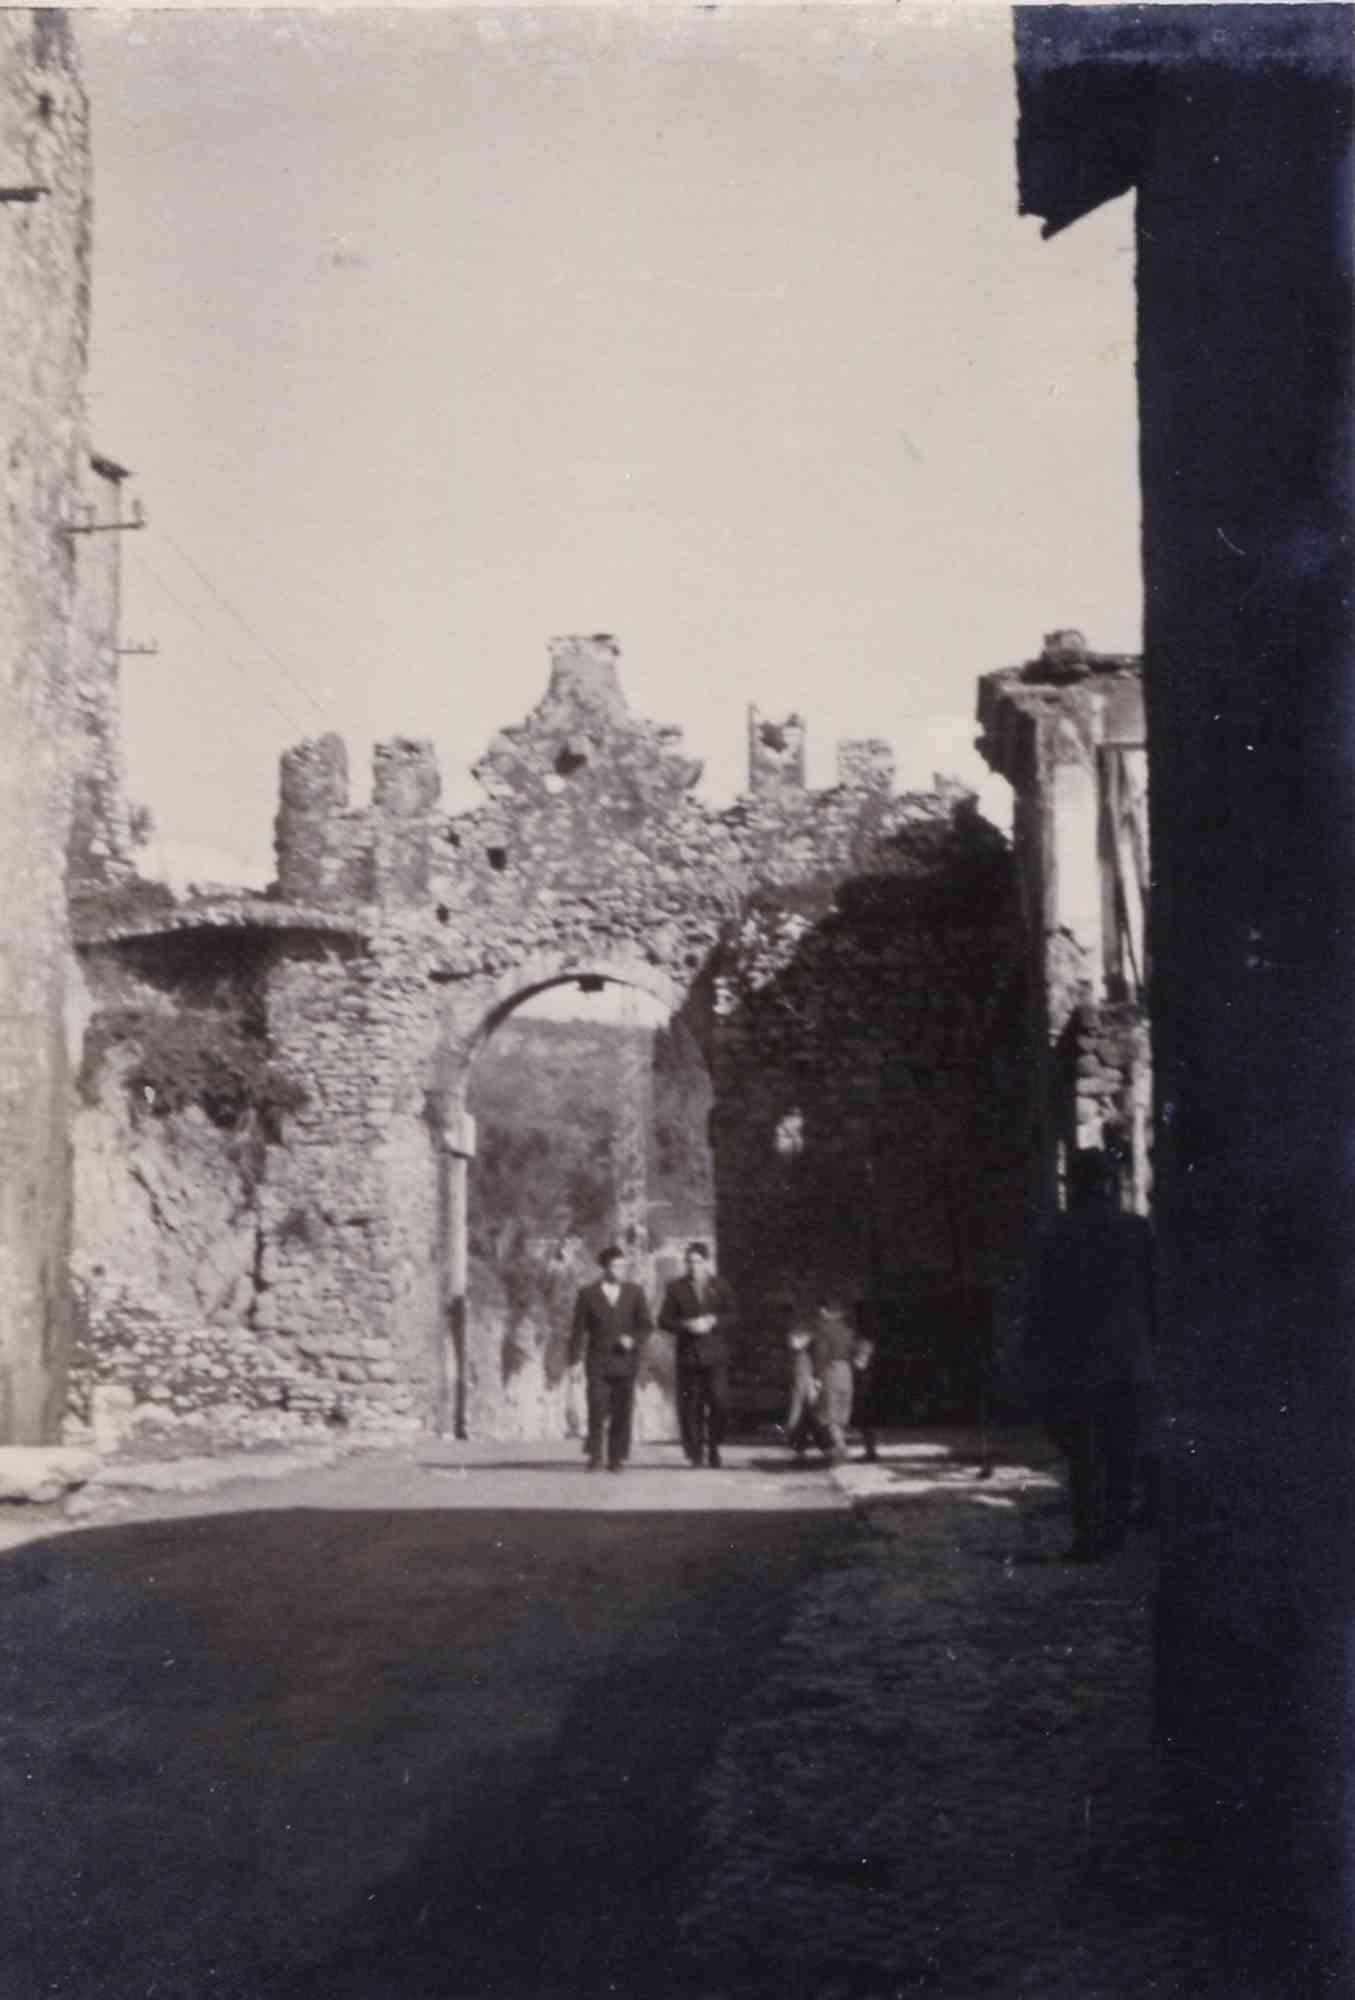 Unknown Figurative Photograph - Old days Photo - Roman Arch - Vintage Photo - Mid-20th Century